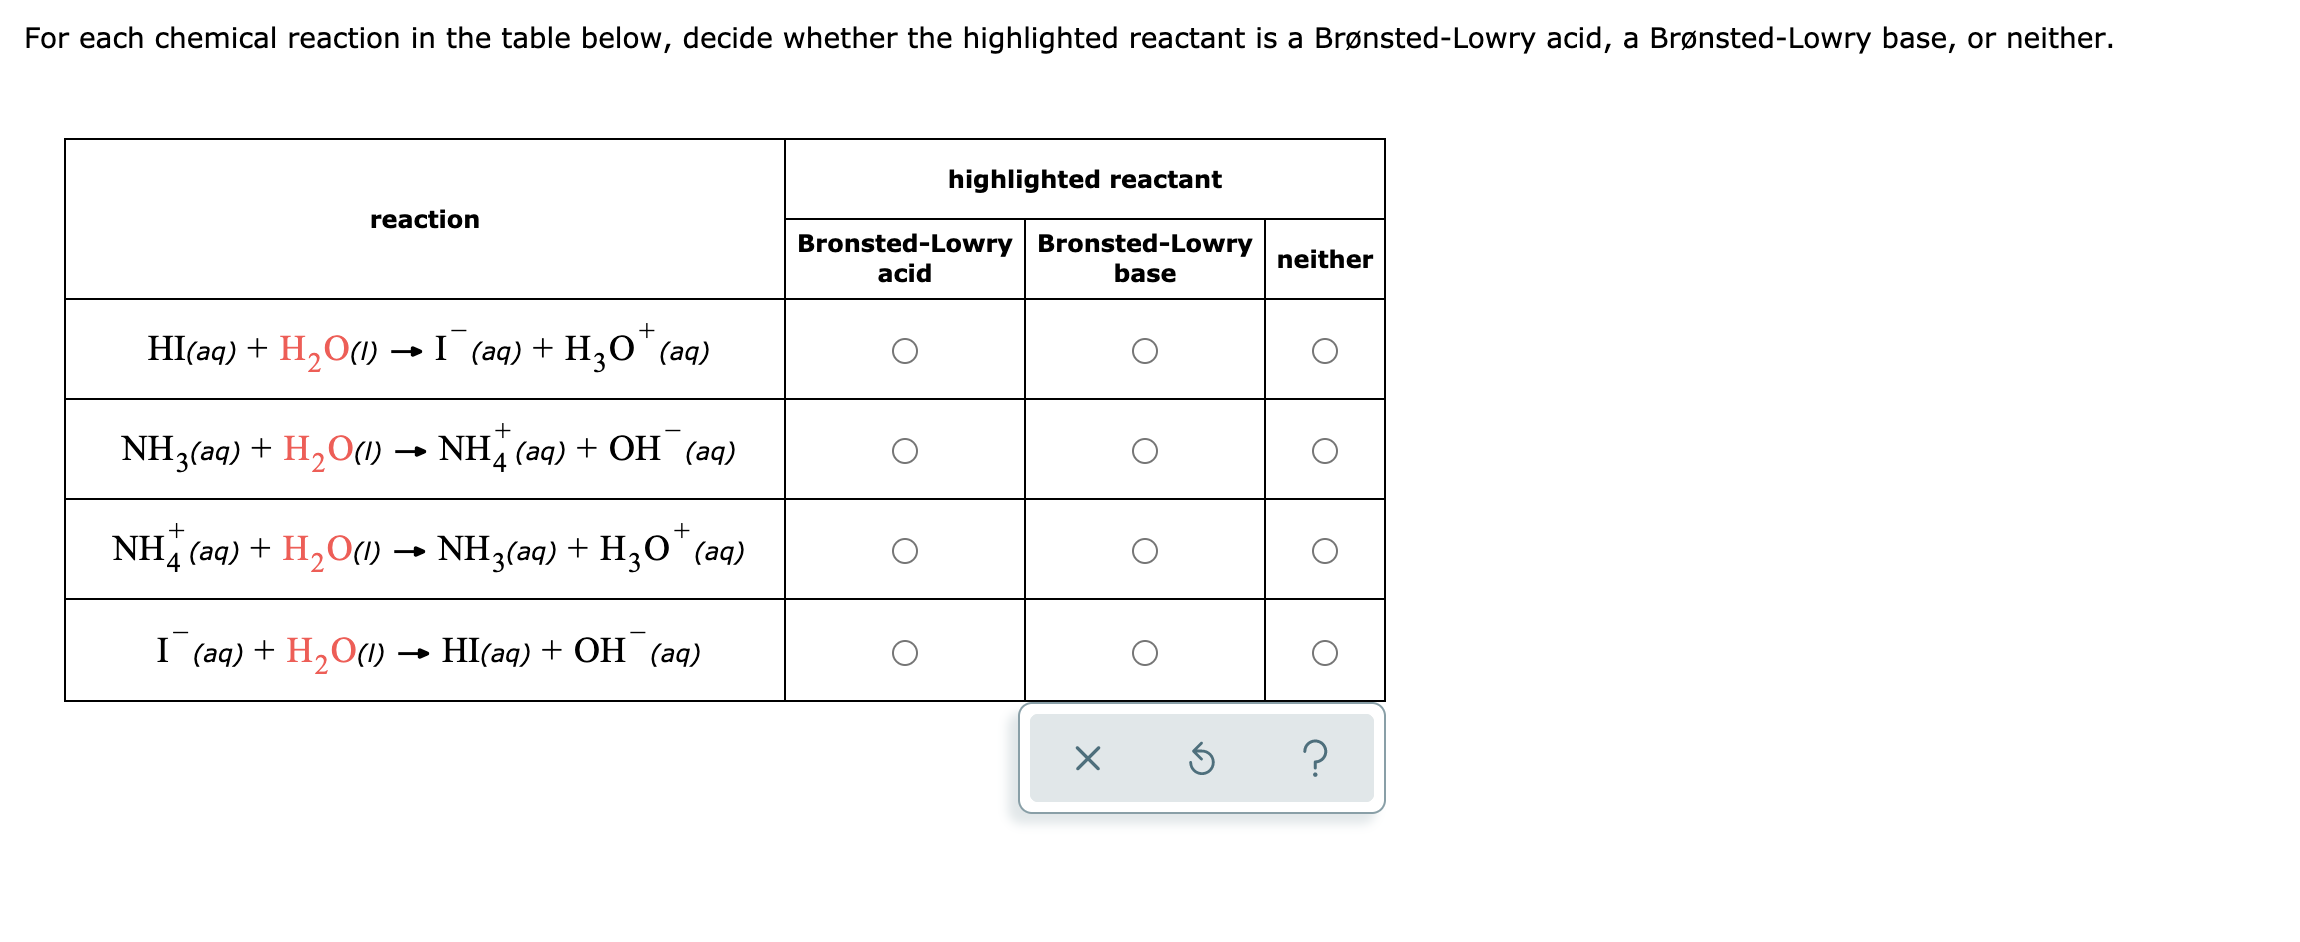 For each chemical reaction in the table below, decide whether the highlighted reactant is a Brønsted-Lowry acid, a Brønsted-Lowry base, or neither.
highlighted reactant
reaction
Bronsted-Lowry Bronsted-Lowry
neither
acid
base
HI(aq) + H,O(1) I (aq) + H,0" (aq)
+
NH3(aq) + H2O1) → NH (aq) + OH (aq)
4
+
NH (aq) + H,O(1) → NH3(aq) + H;O'(aq)
I (aq) + H,O(1) → HI(aq) + OH (aq)
?
